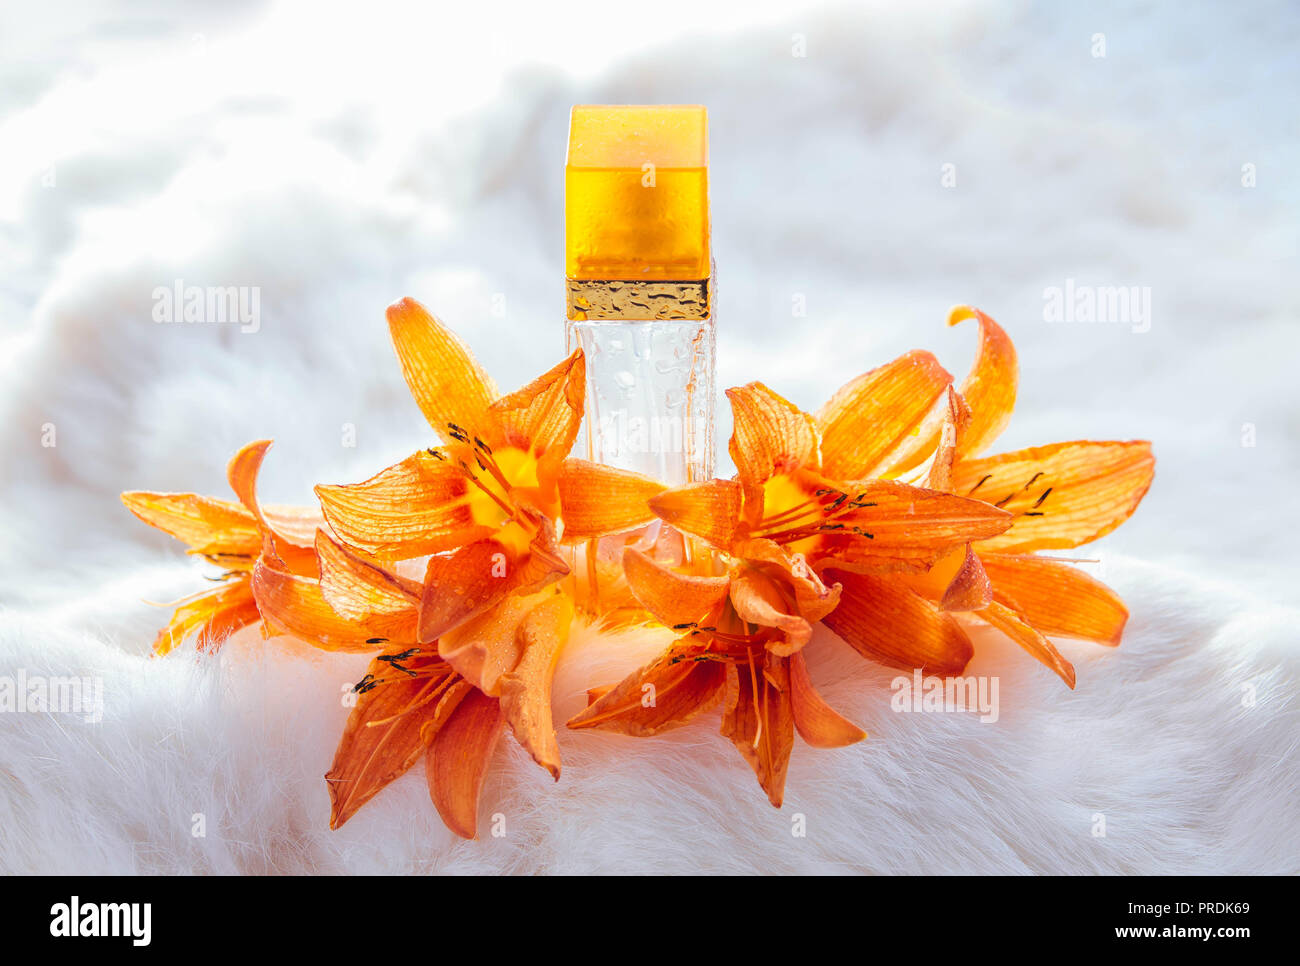 Bottle of perfume with lily on white fur background Stock Photo